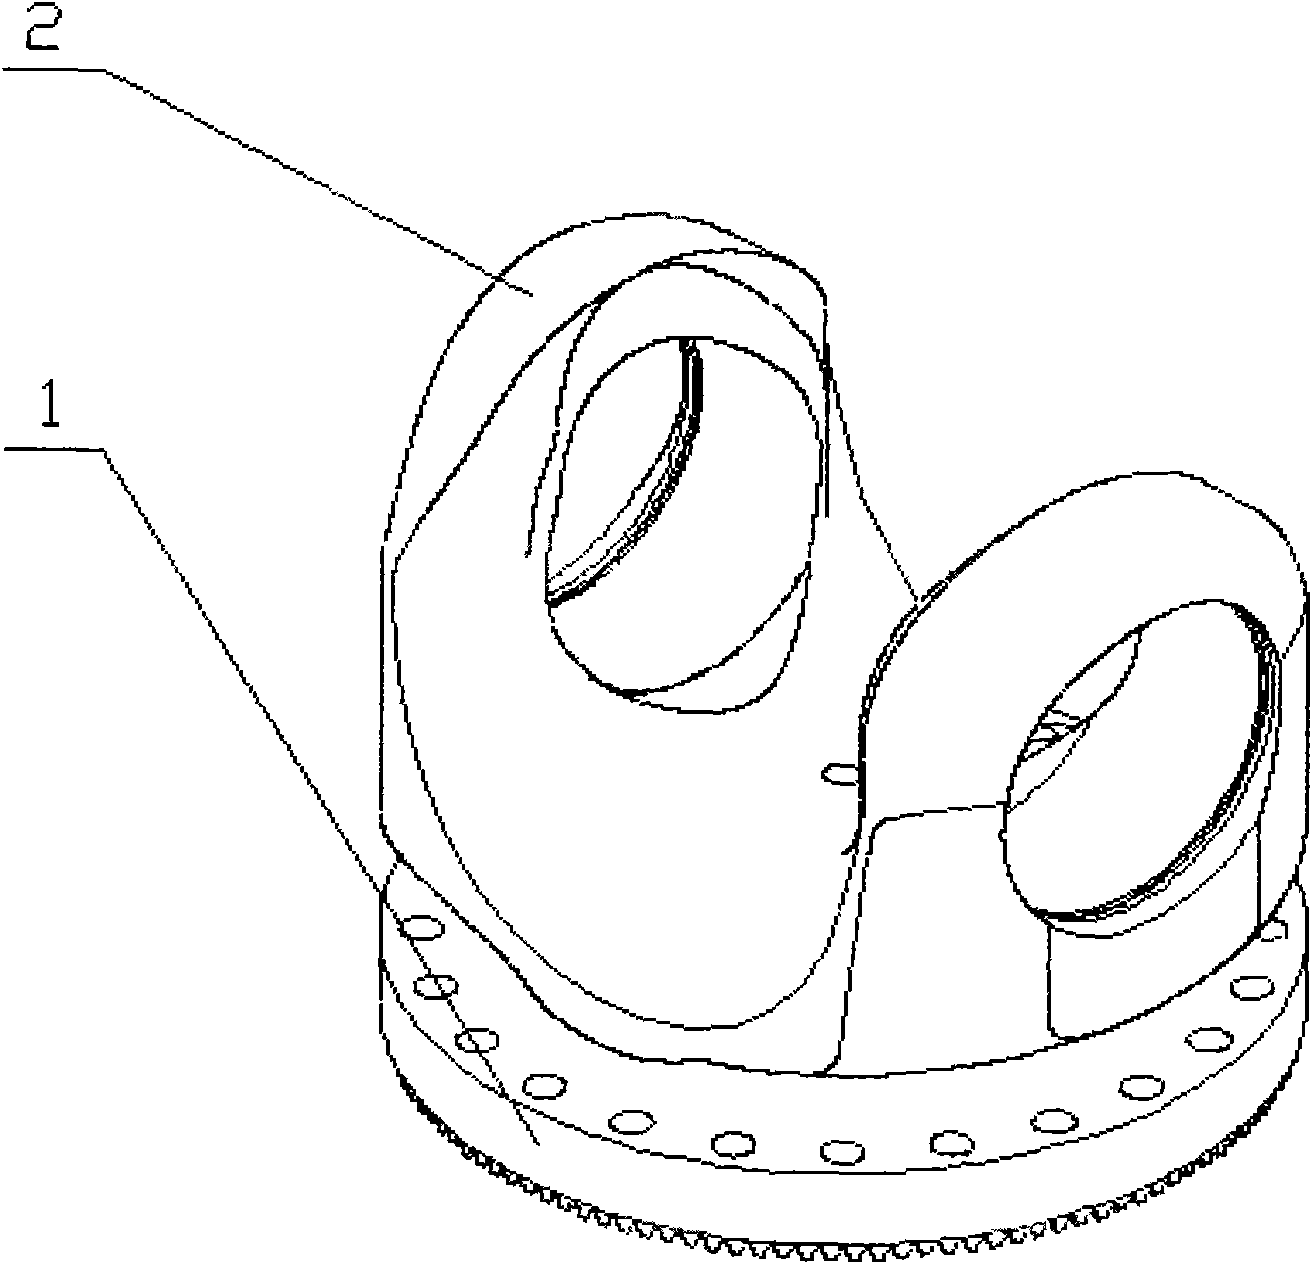 Forkhead of universal coupling